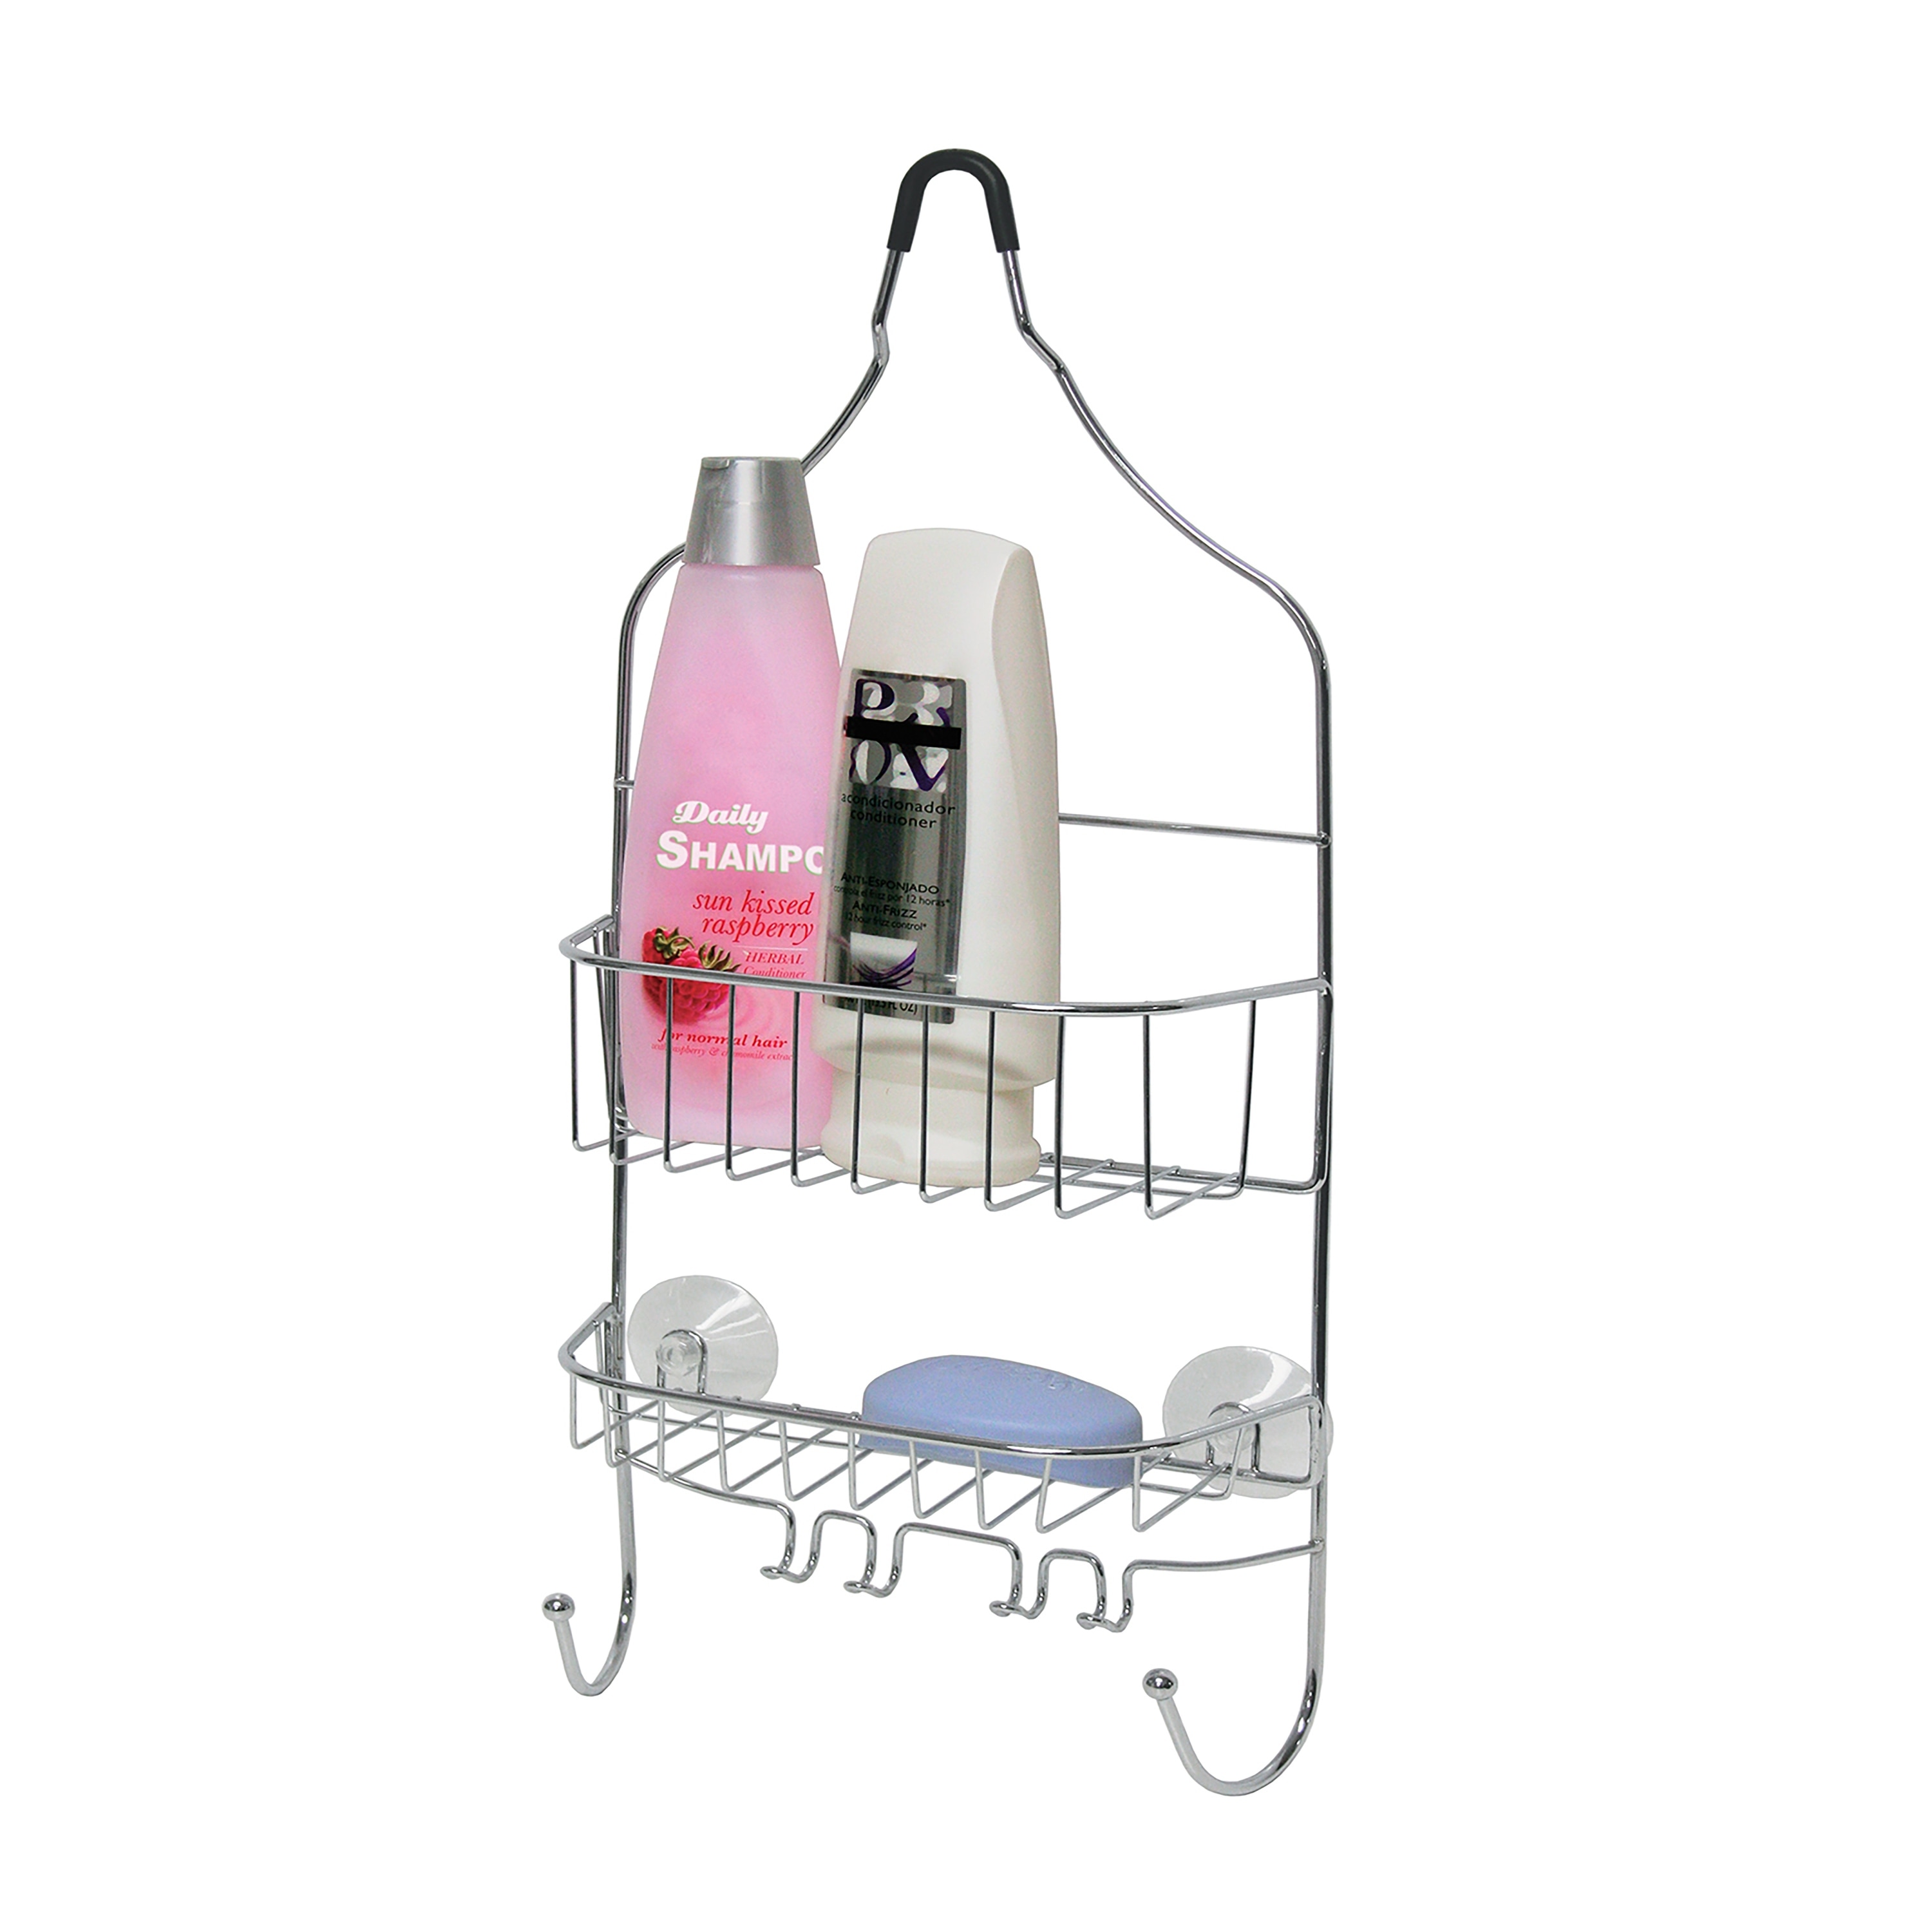 https://ak1.ostkcdn.com/images/products/is/images/direct/befa36e2ed25fc9f5014ea1fed57a065580e28cd/Bath-Bliss-Shower-Caddy-In-Chrome-With-Clear-Ends.jpg